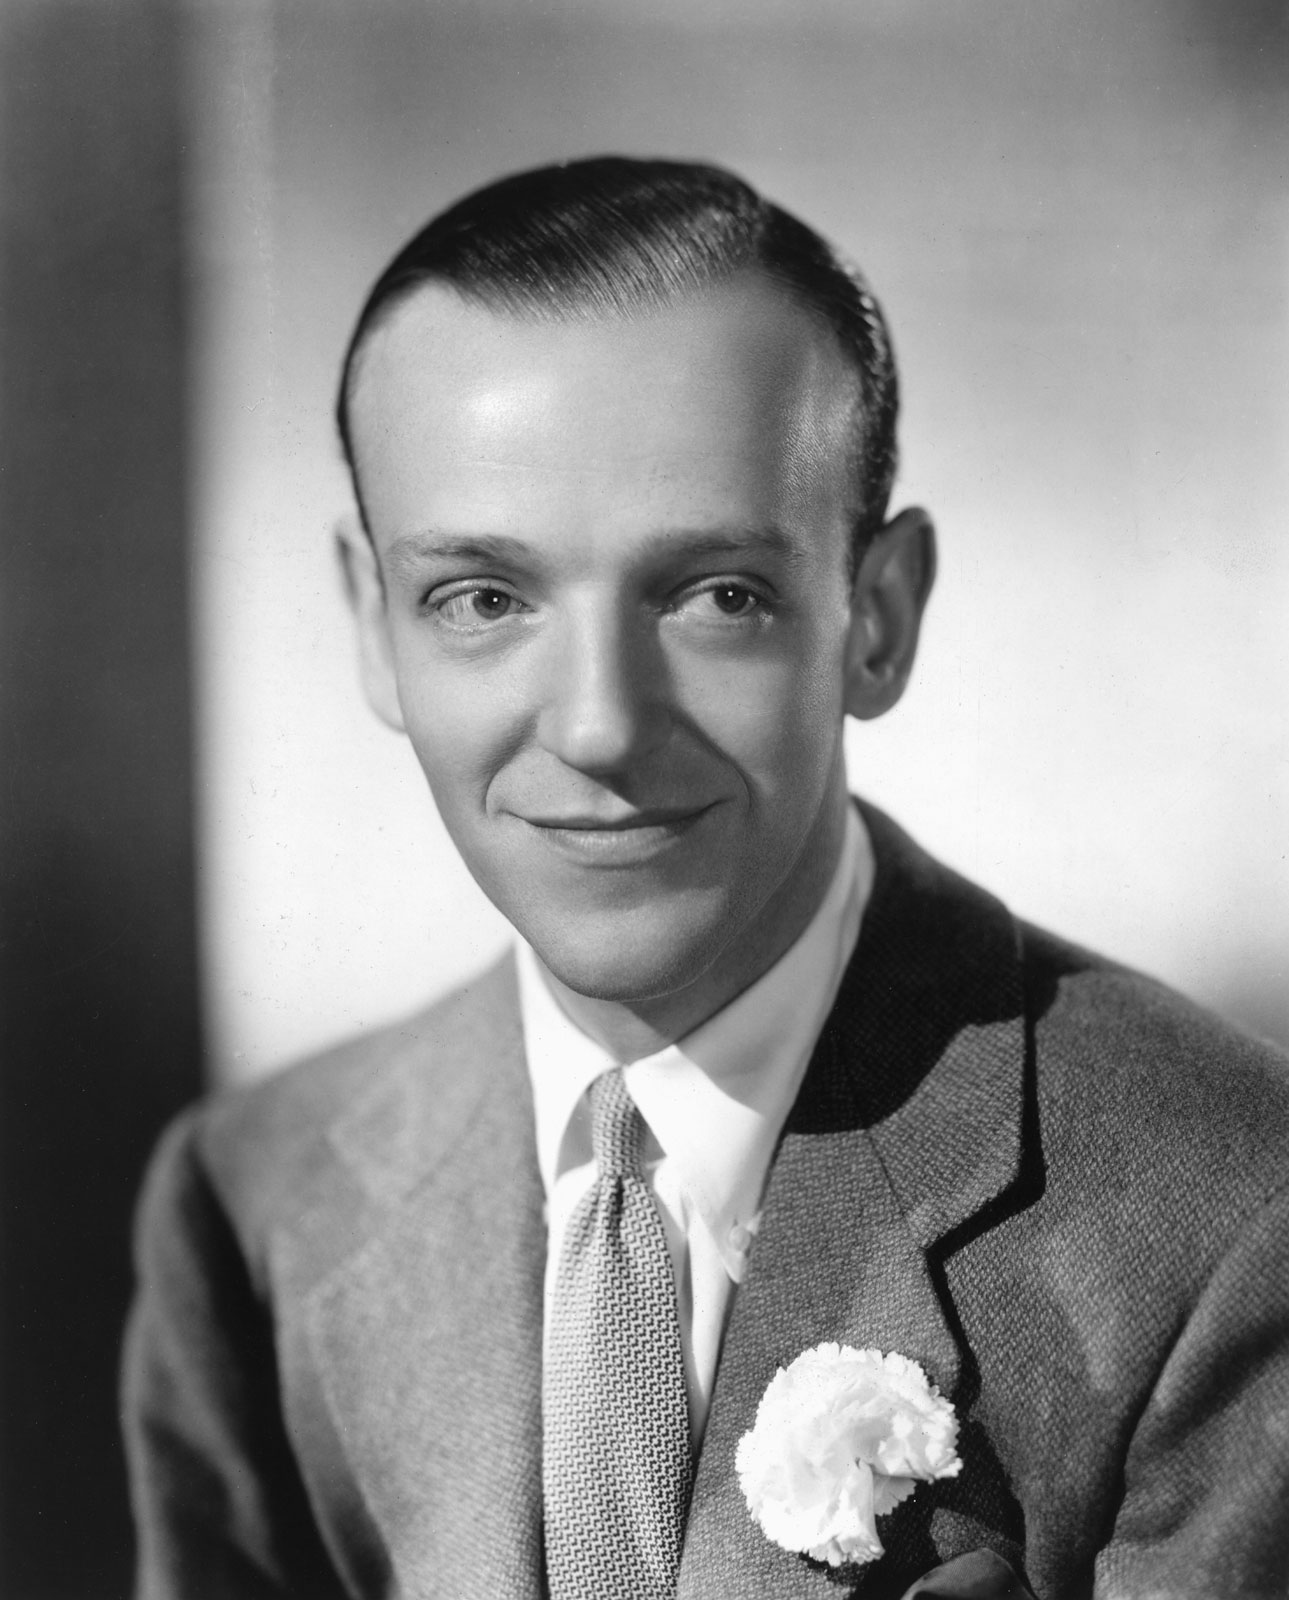 How tall is Fred Astaire?